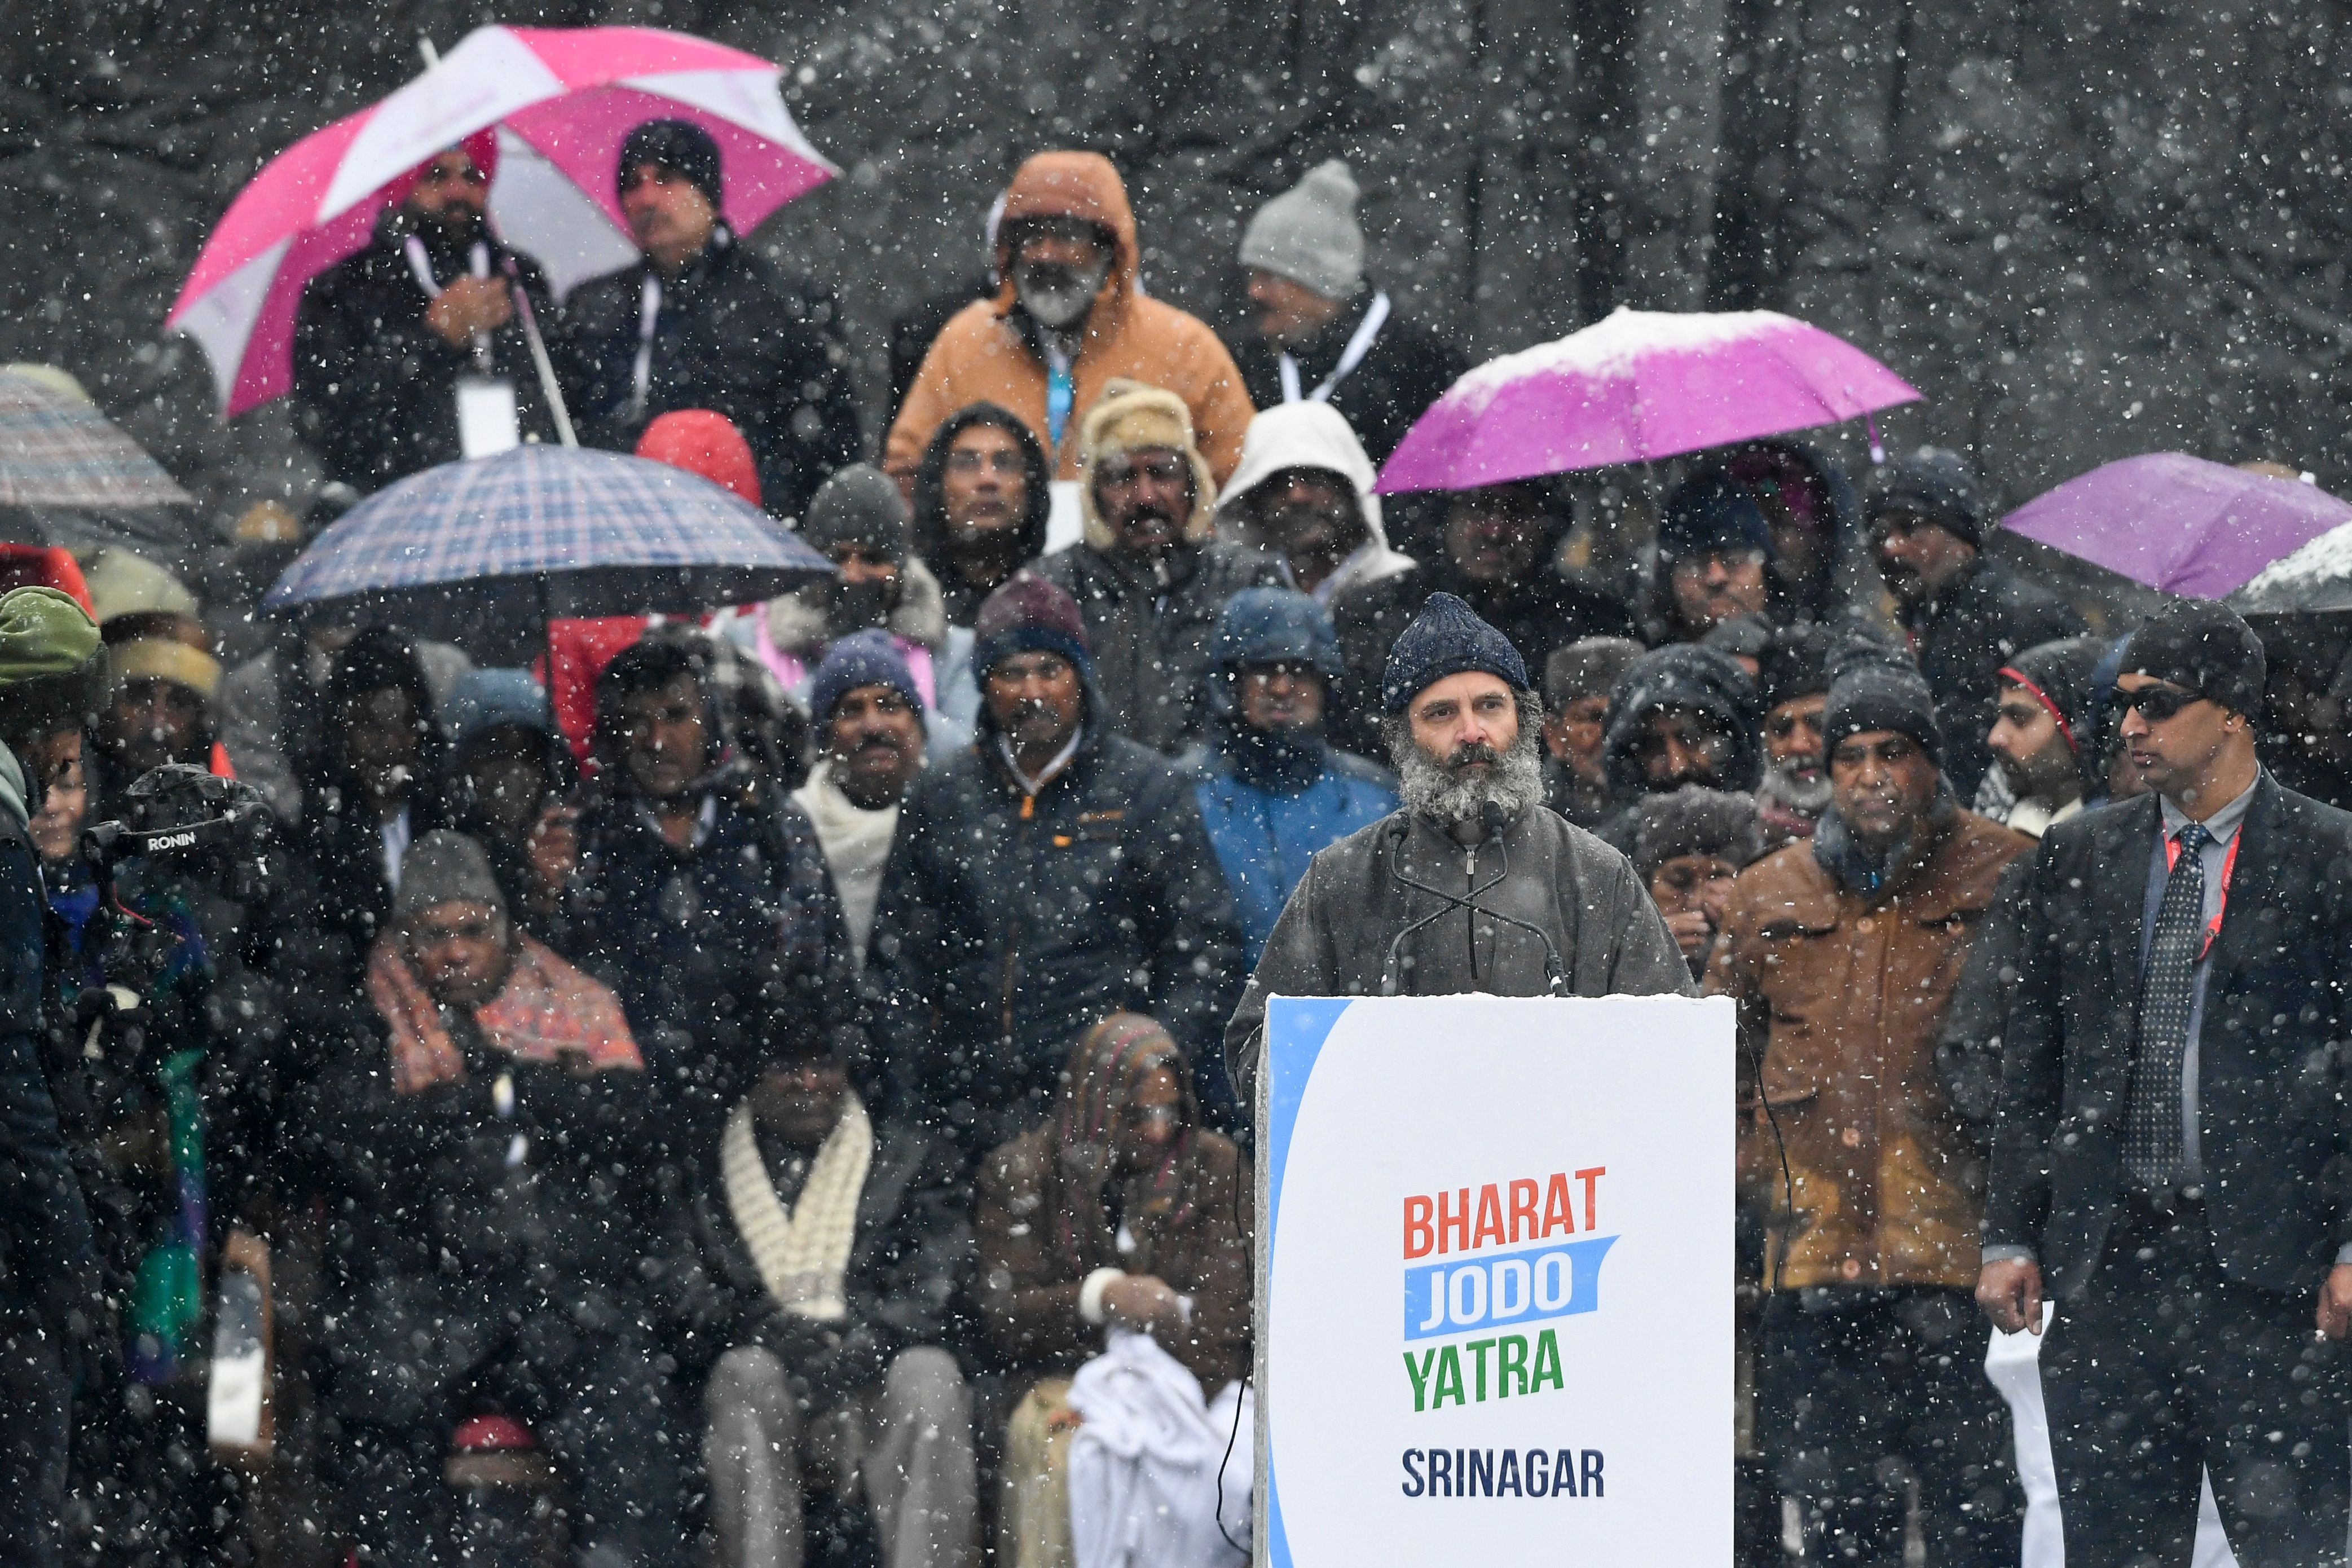 India’s Congress party leader Rahul Gandhi speaks at a public meeting amid heavy snowfall as he concludes the ‘Bharat Jodo Yatra’ march in Srinagar on 30 January 2023